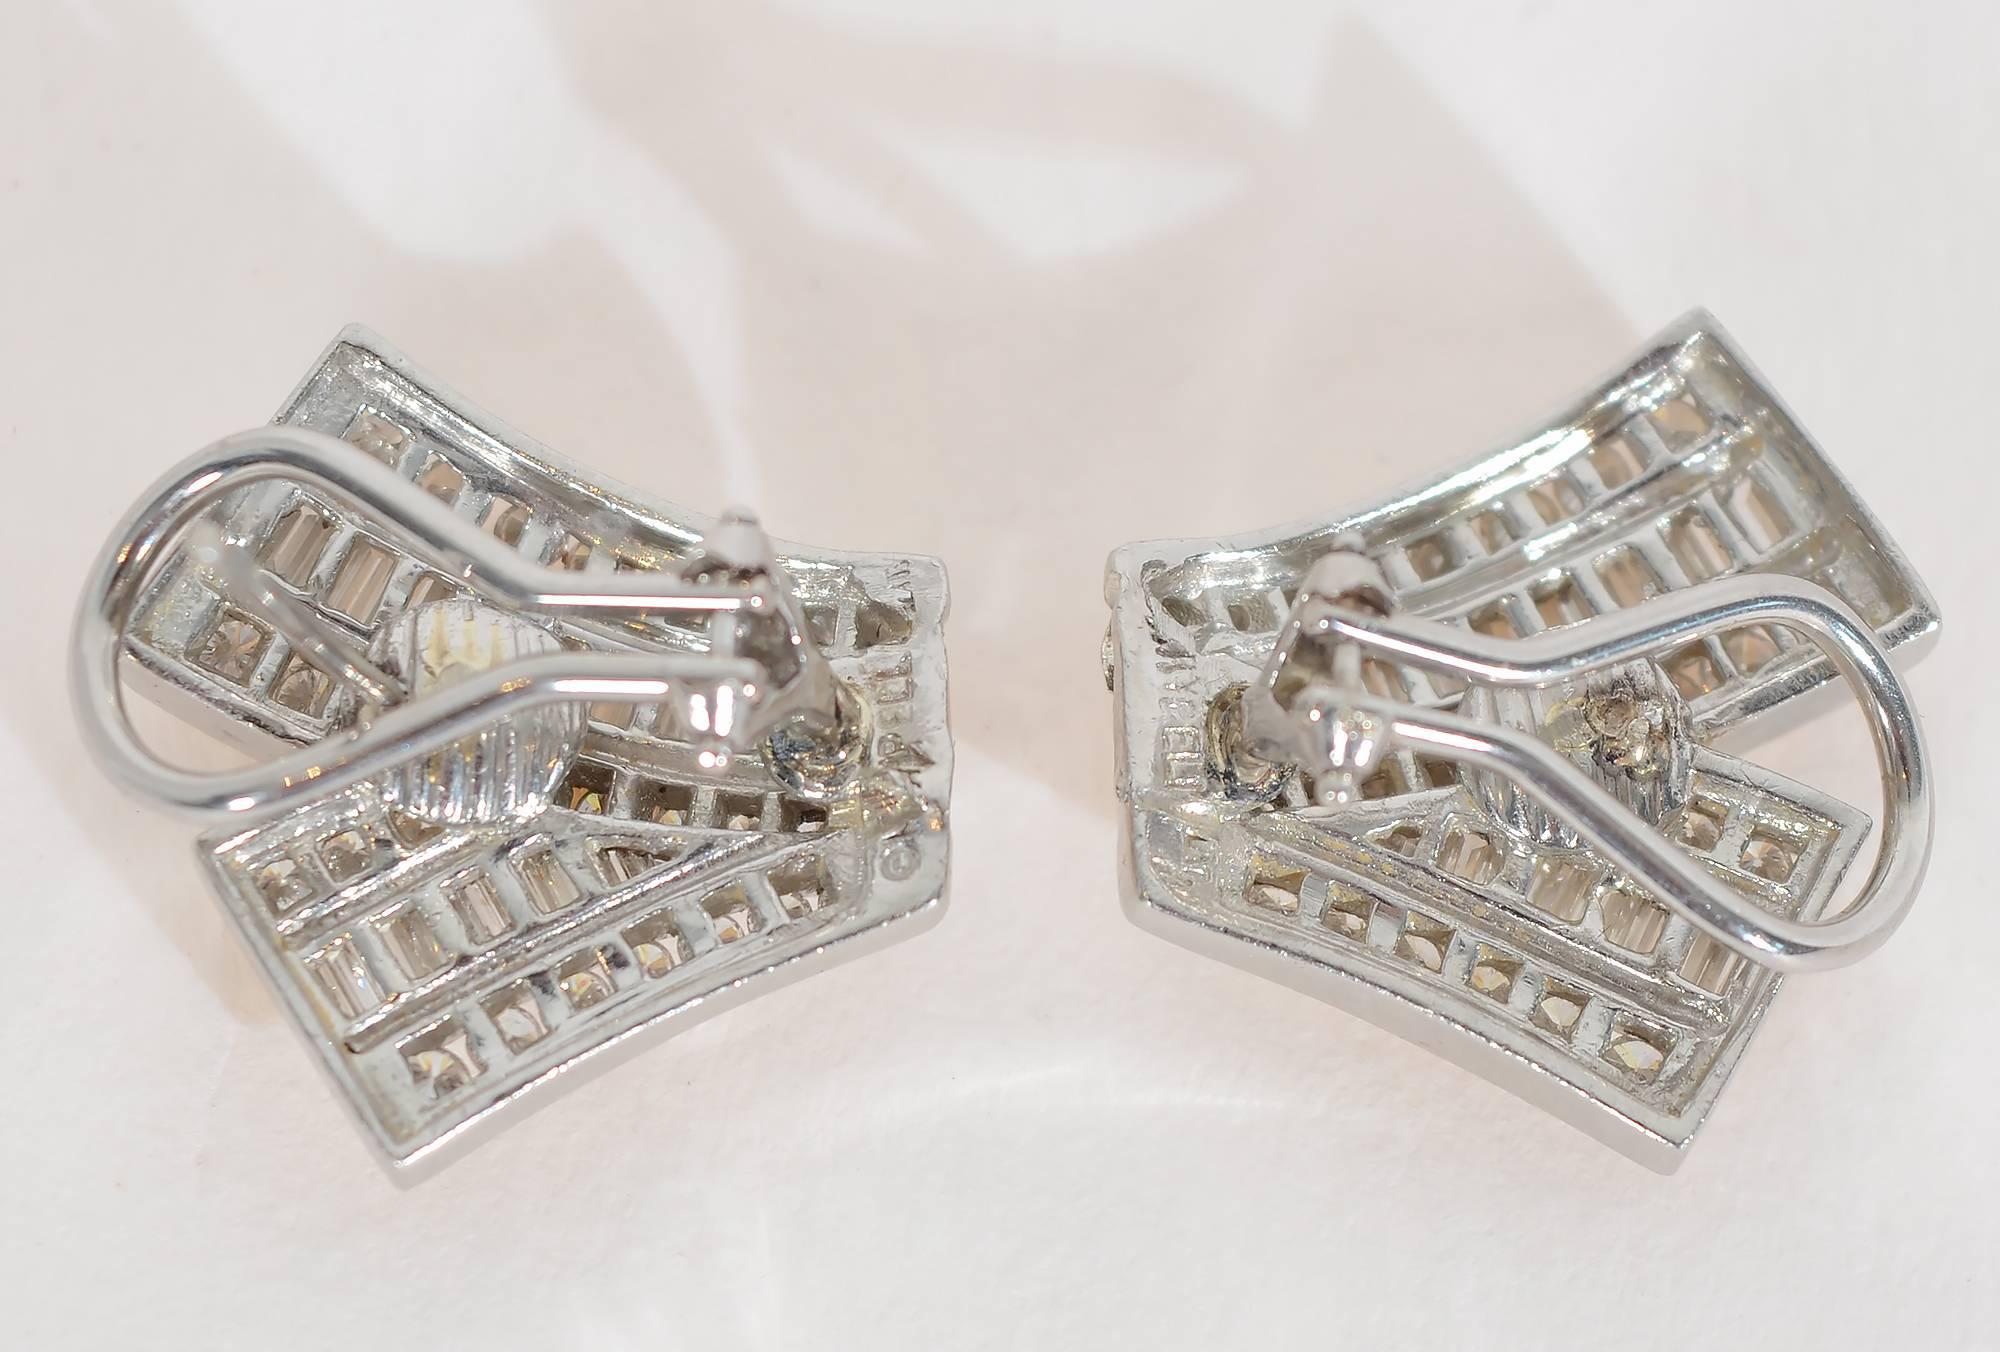 Elegant diamond earrings set in 18 karat white gold by Charles Krypell. The diamonds are baguettes and round of VS-2 quality. Post and clip backs. Measurements are 3/4" tall and 3/4" wide.